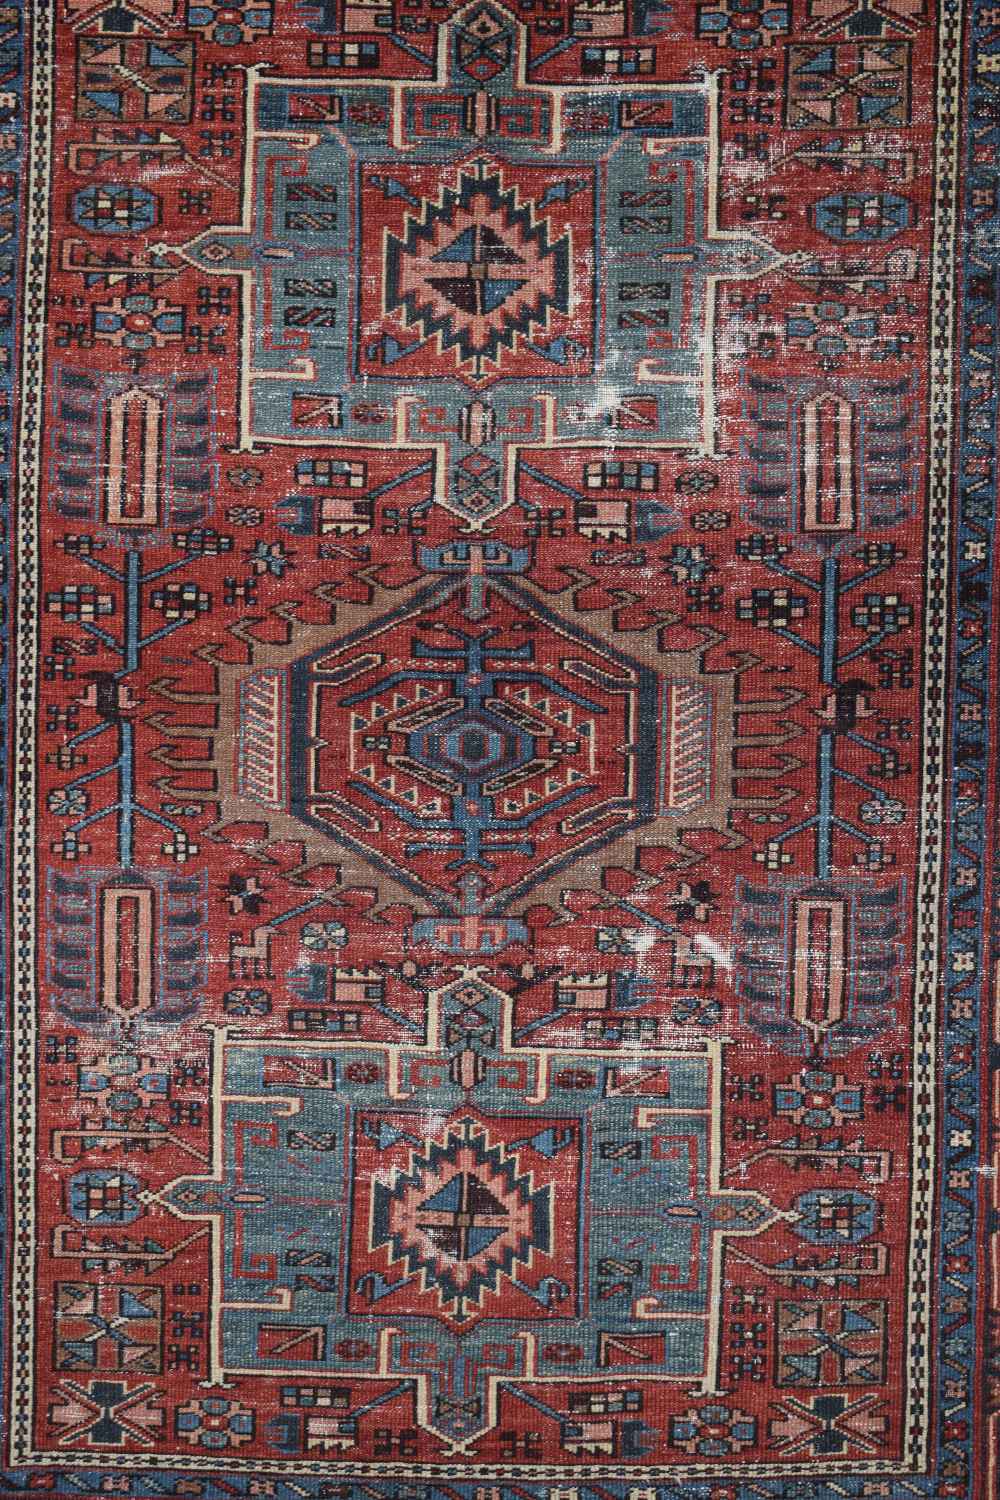 Karaja rug, north west Persia, circa 1930s-40s, 5ft. 11in. X 4ft. 11in. 1.80m. X 1.50m. Overall - Image 8 of 9